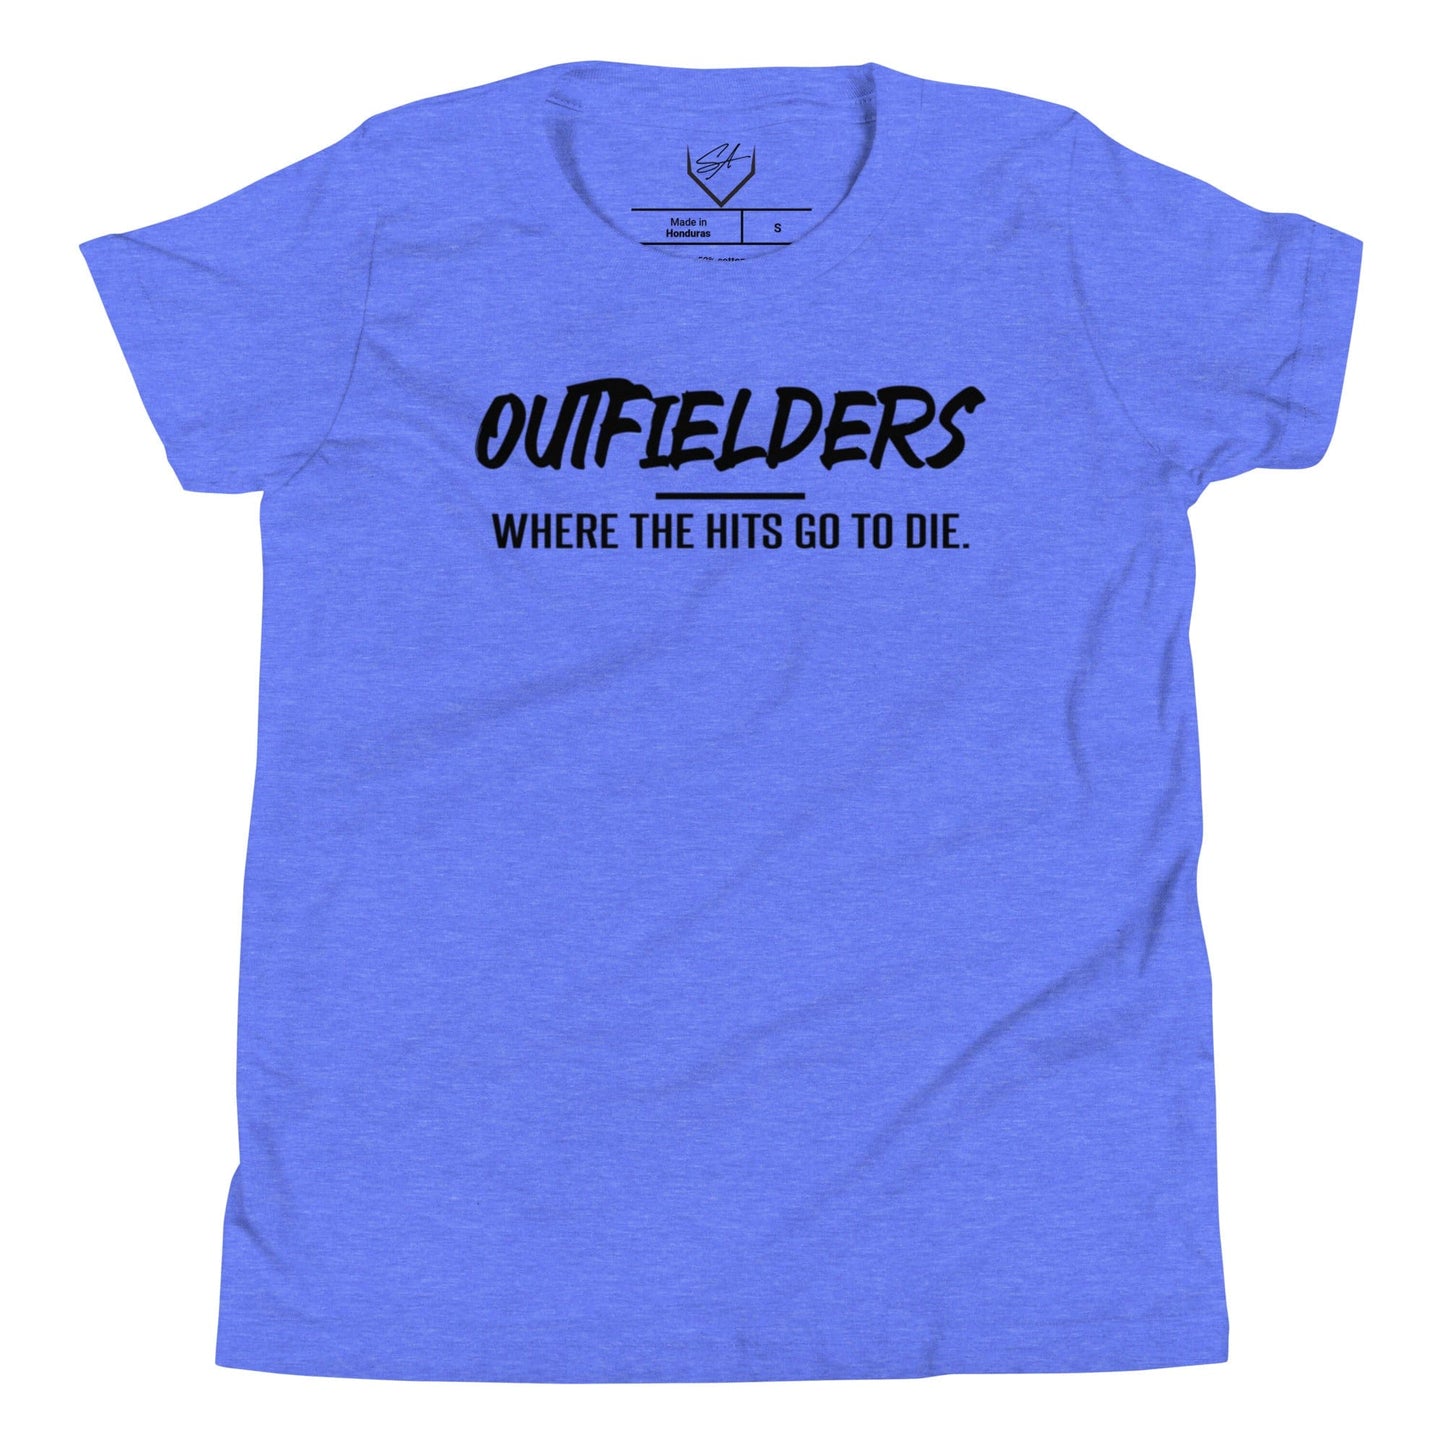 Outfielders: Where The Hits Go To Die - Youth Baseball Tee